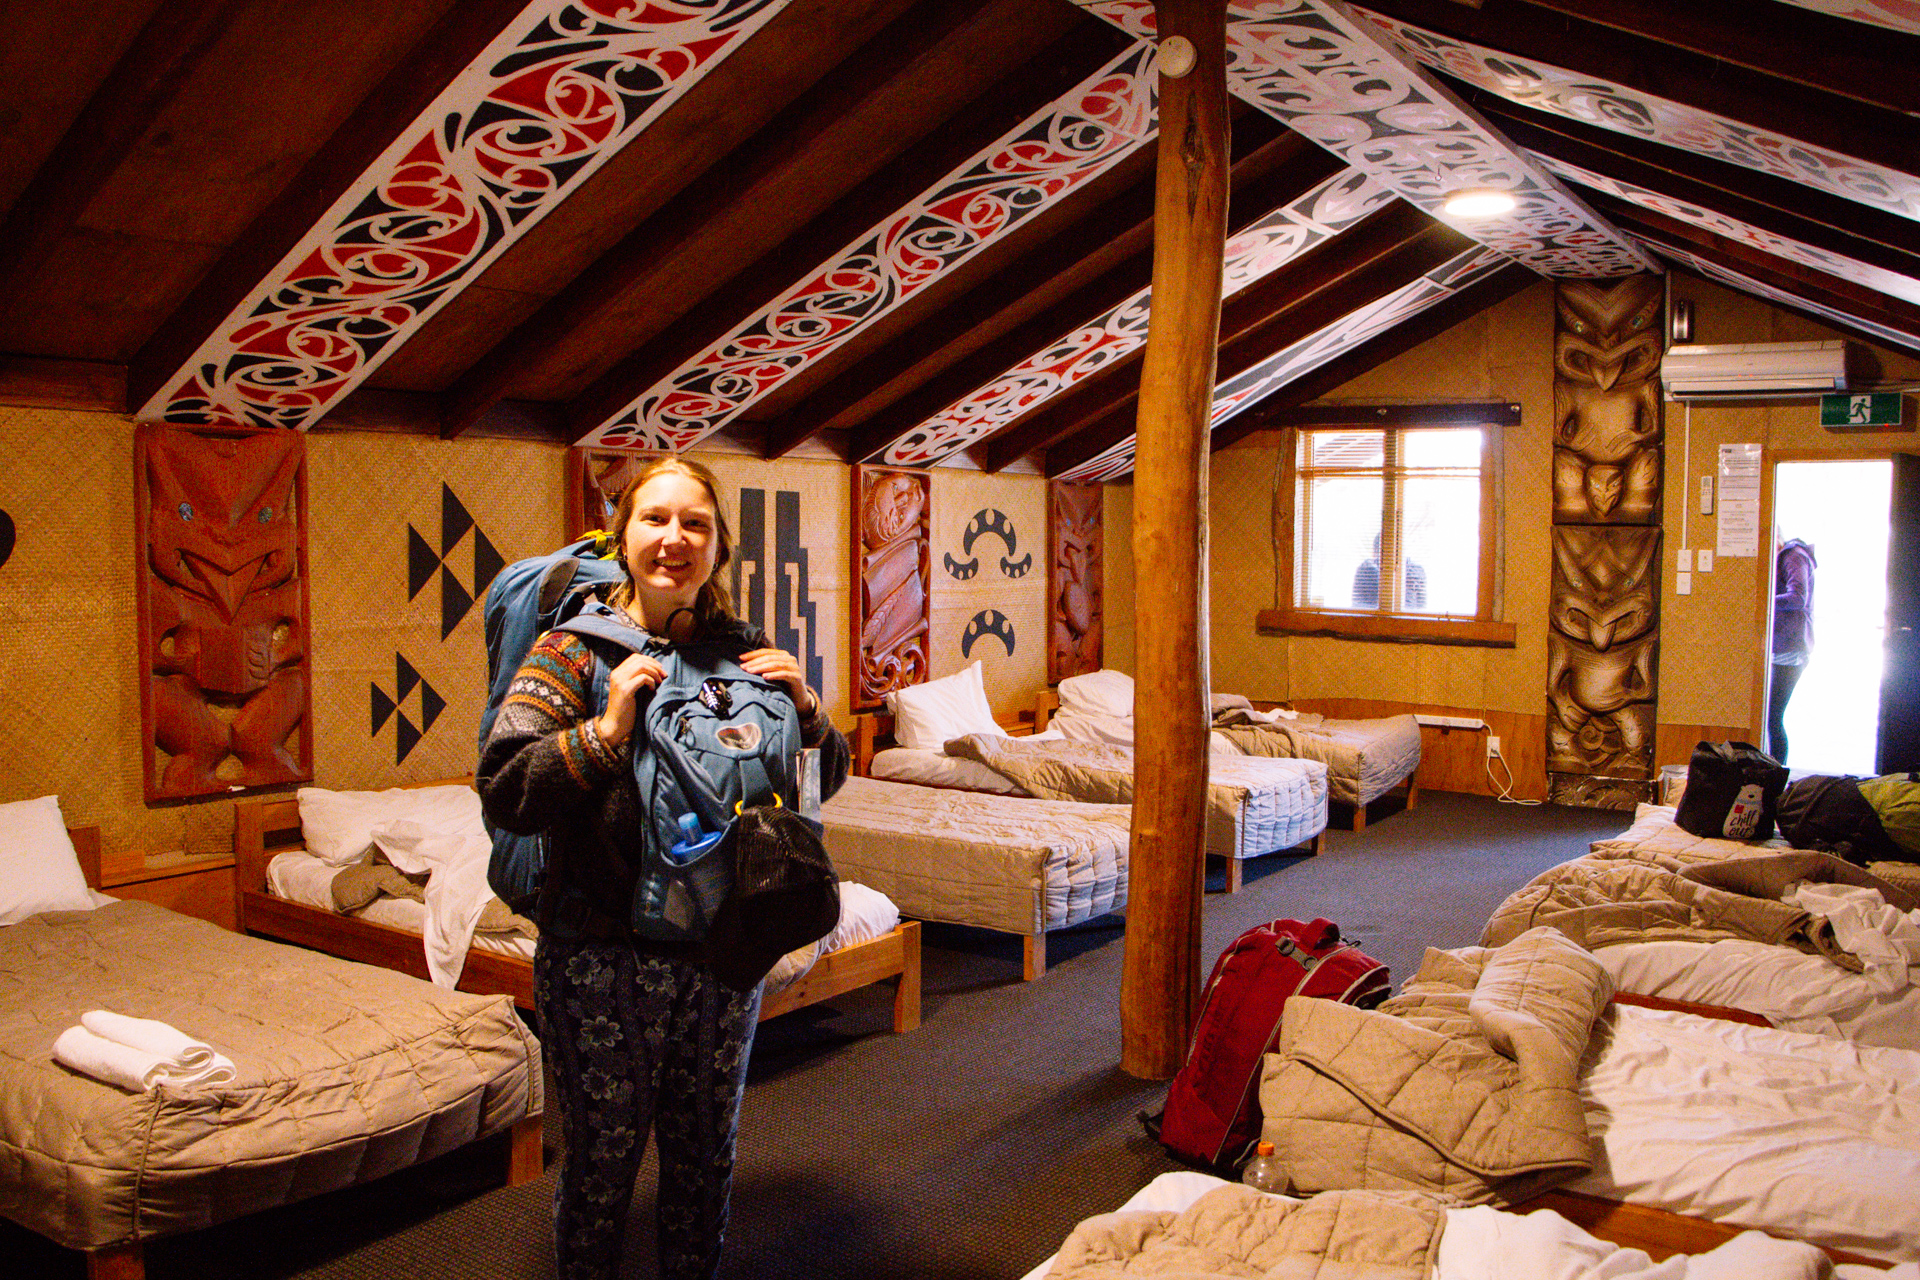 Inside the room of Tamaki Maori Village Beds and conditions